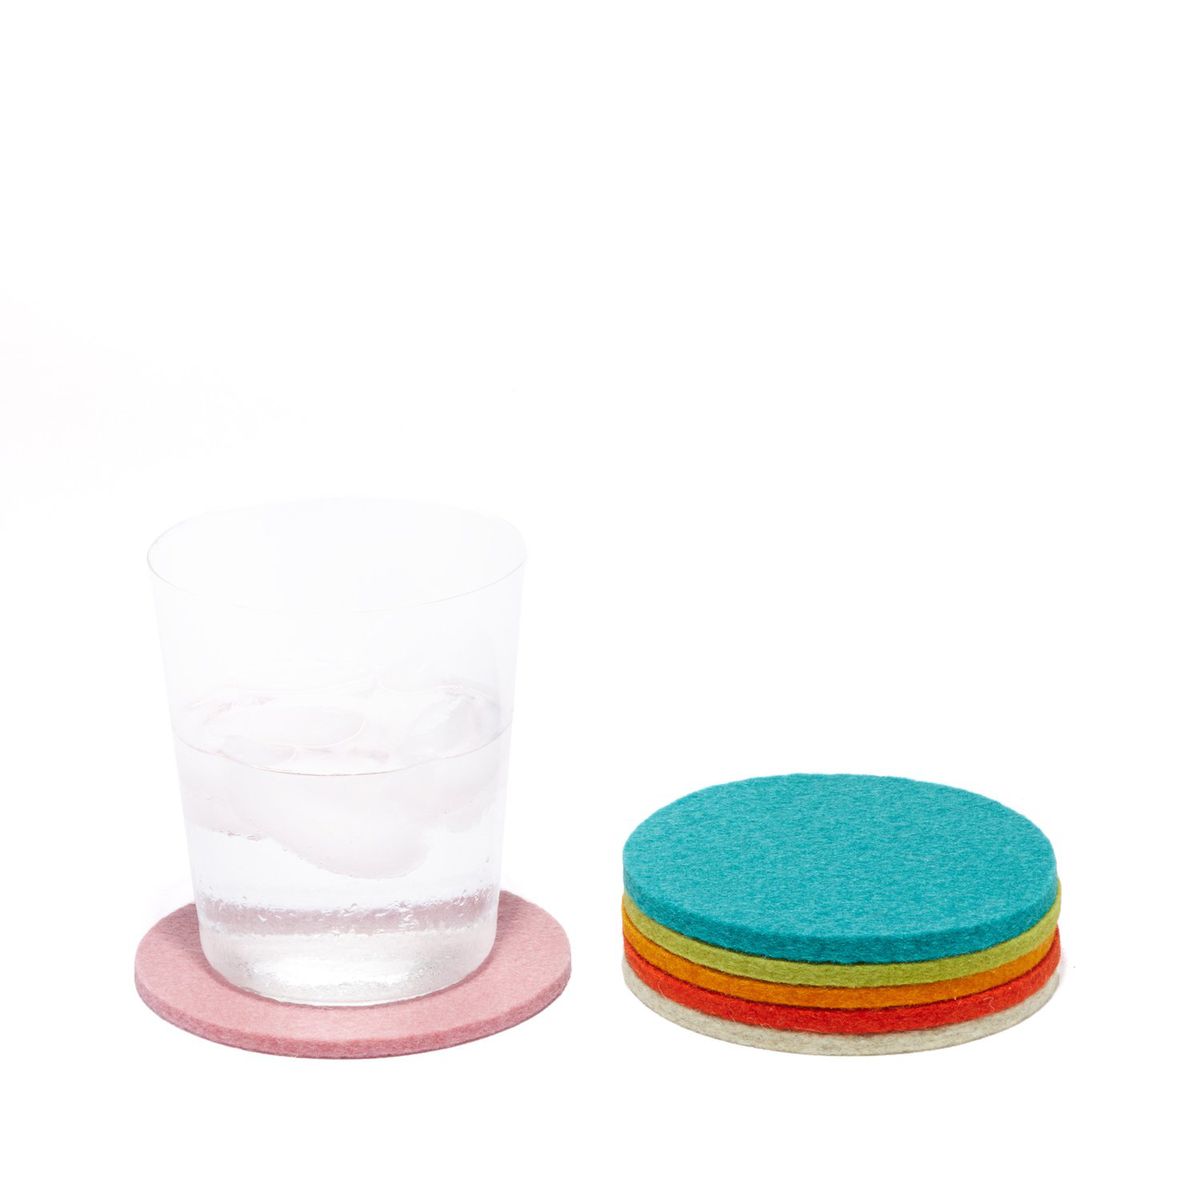 A stack of multicolored coasters next to a pink coaster with a water glass on top